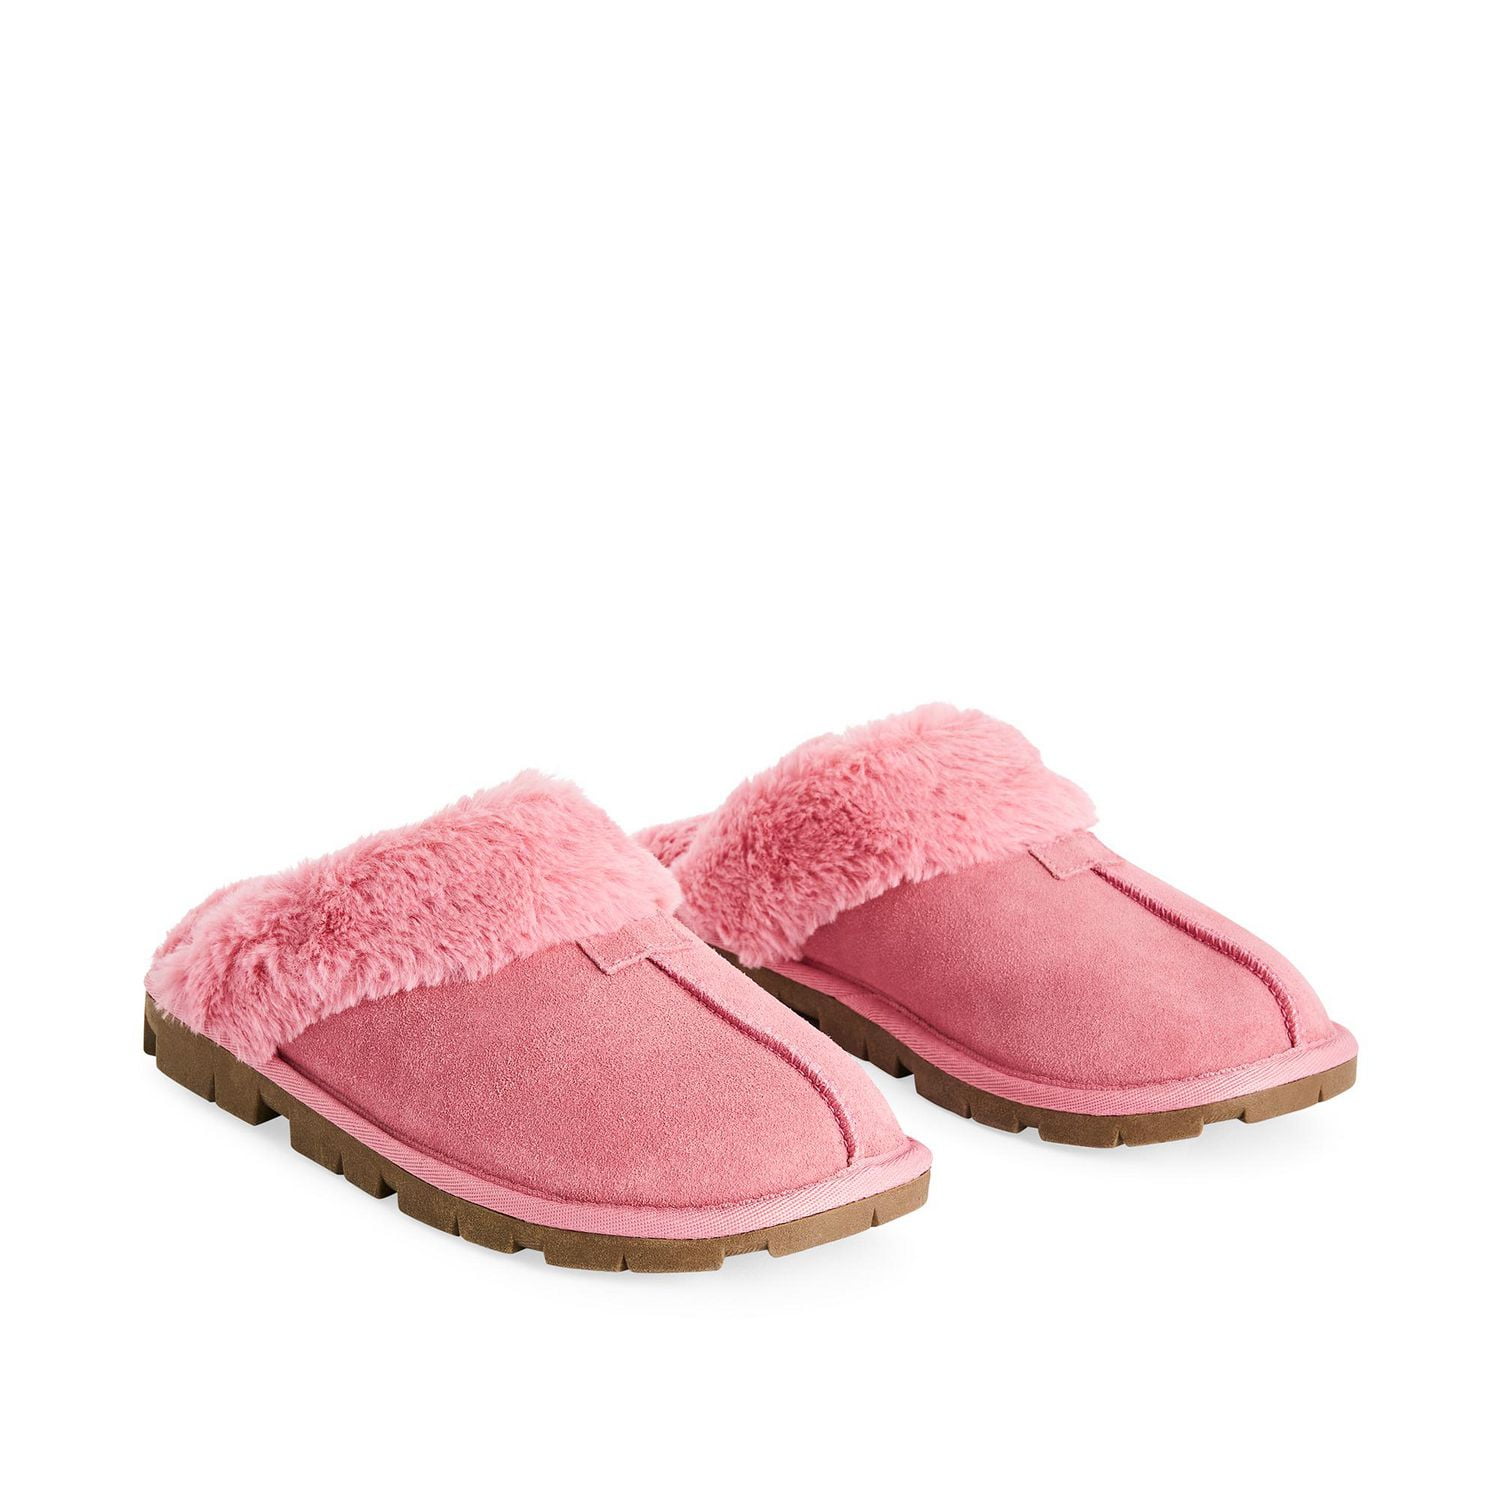 Slippers Smiley Face Slippers Women Smile Slippers Happy Face